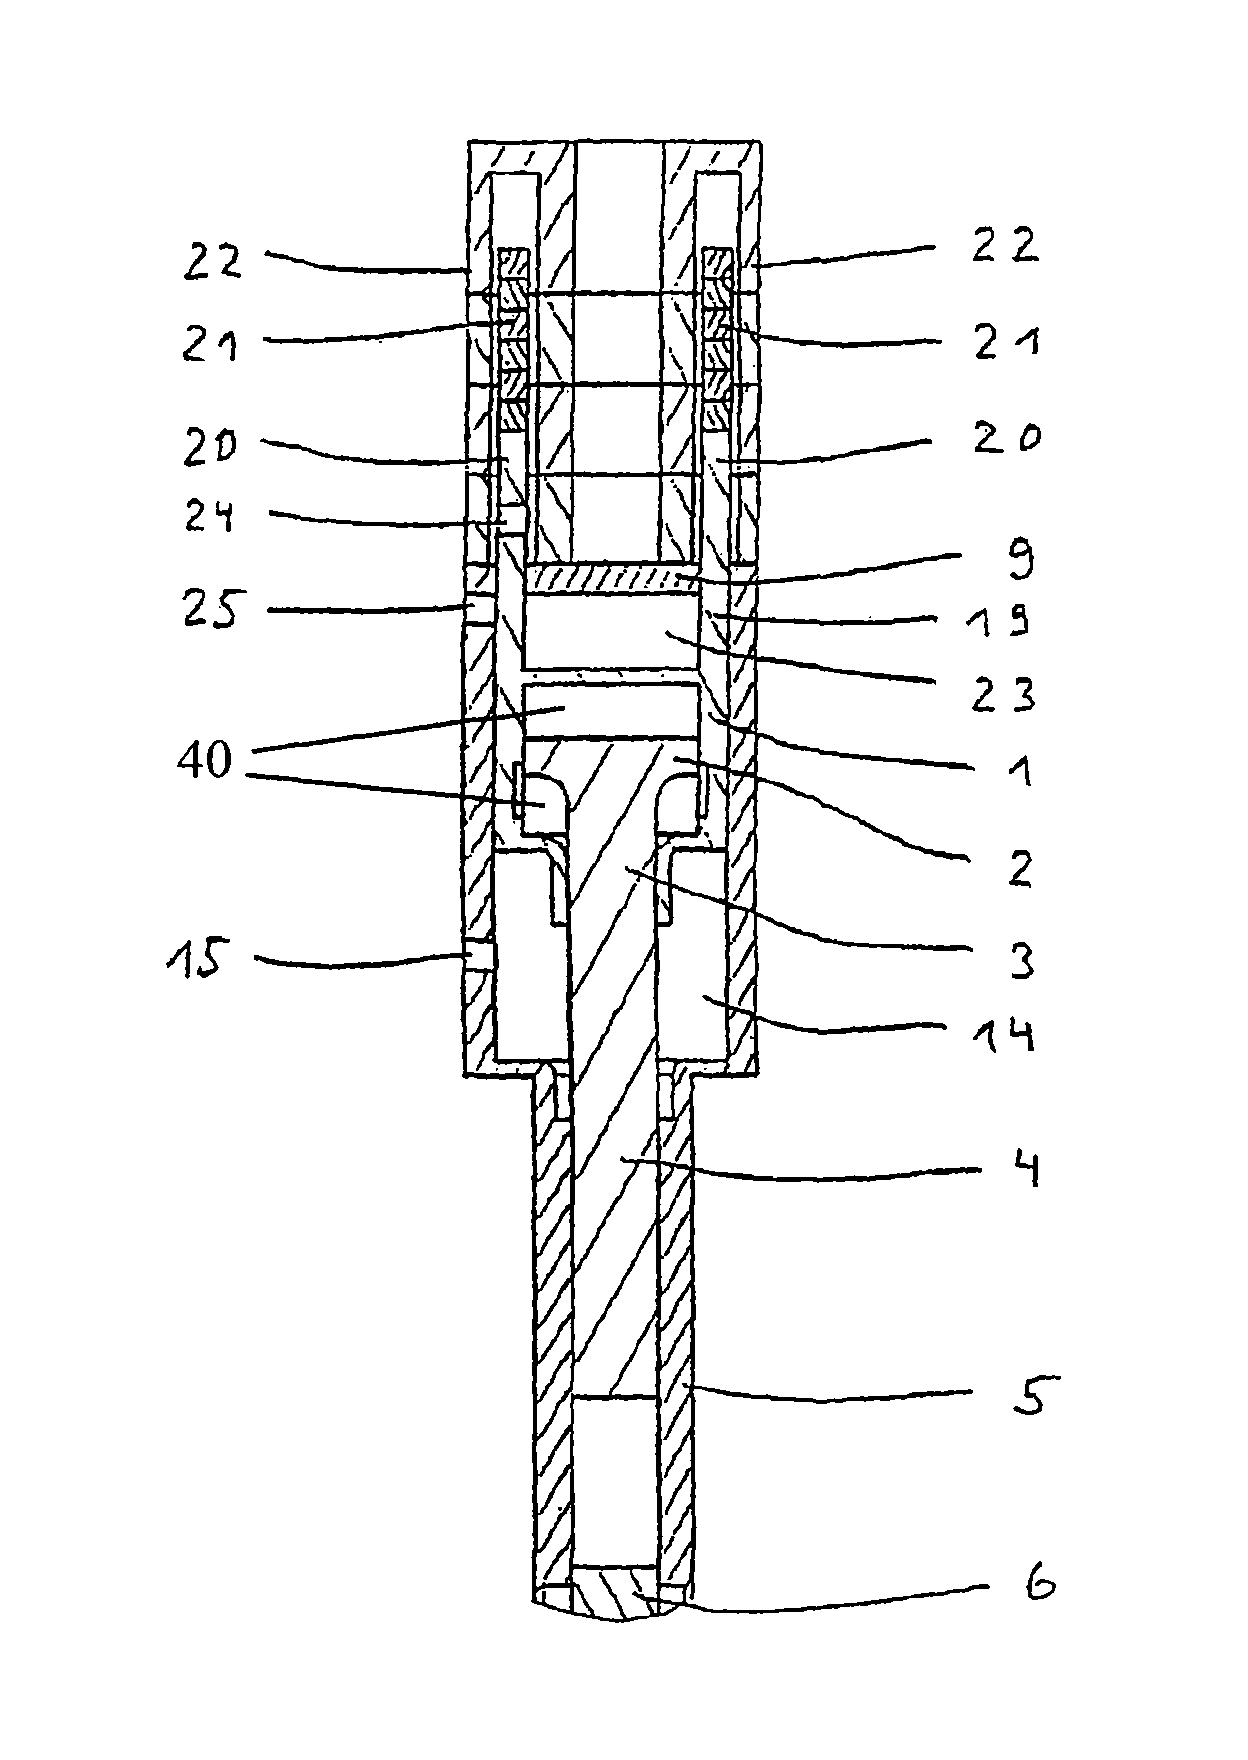 Percussive mechanism with an electrodynamic linear drive